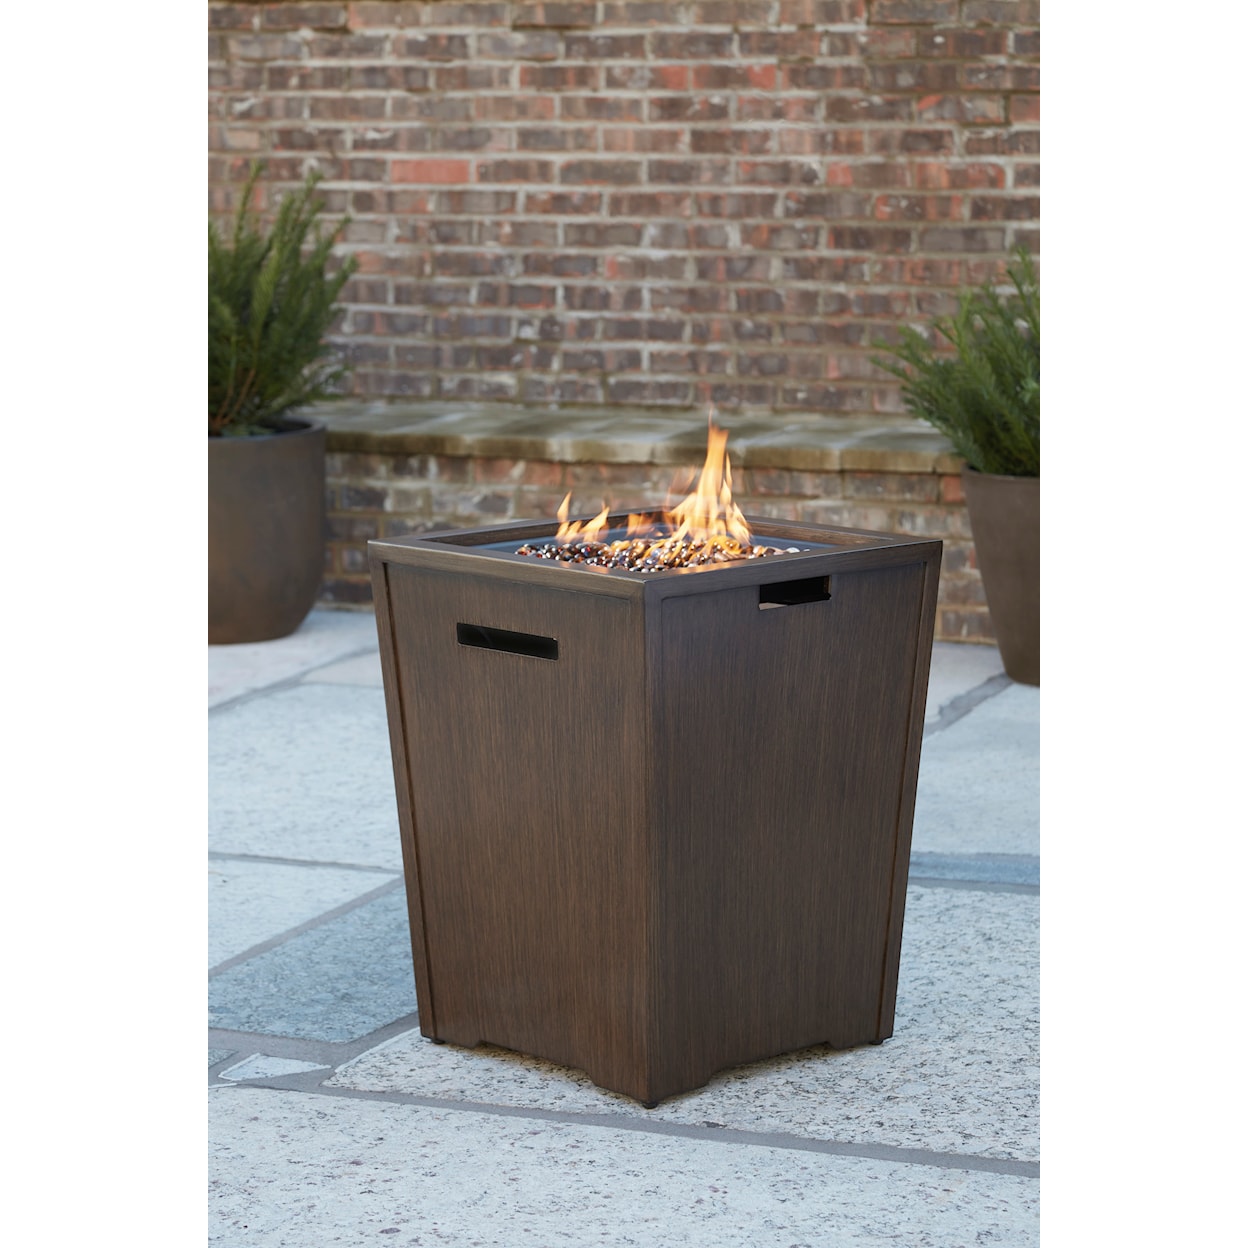 Signature Design by Ashley Rodeway South Fire Pit